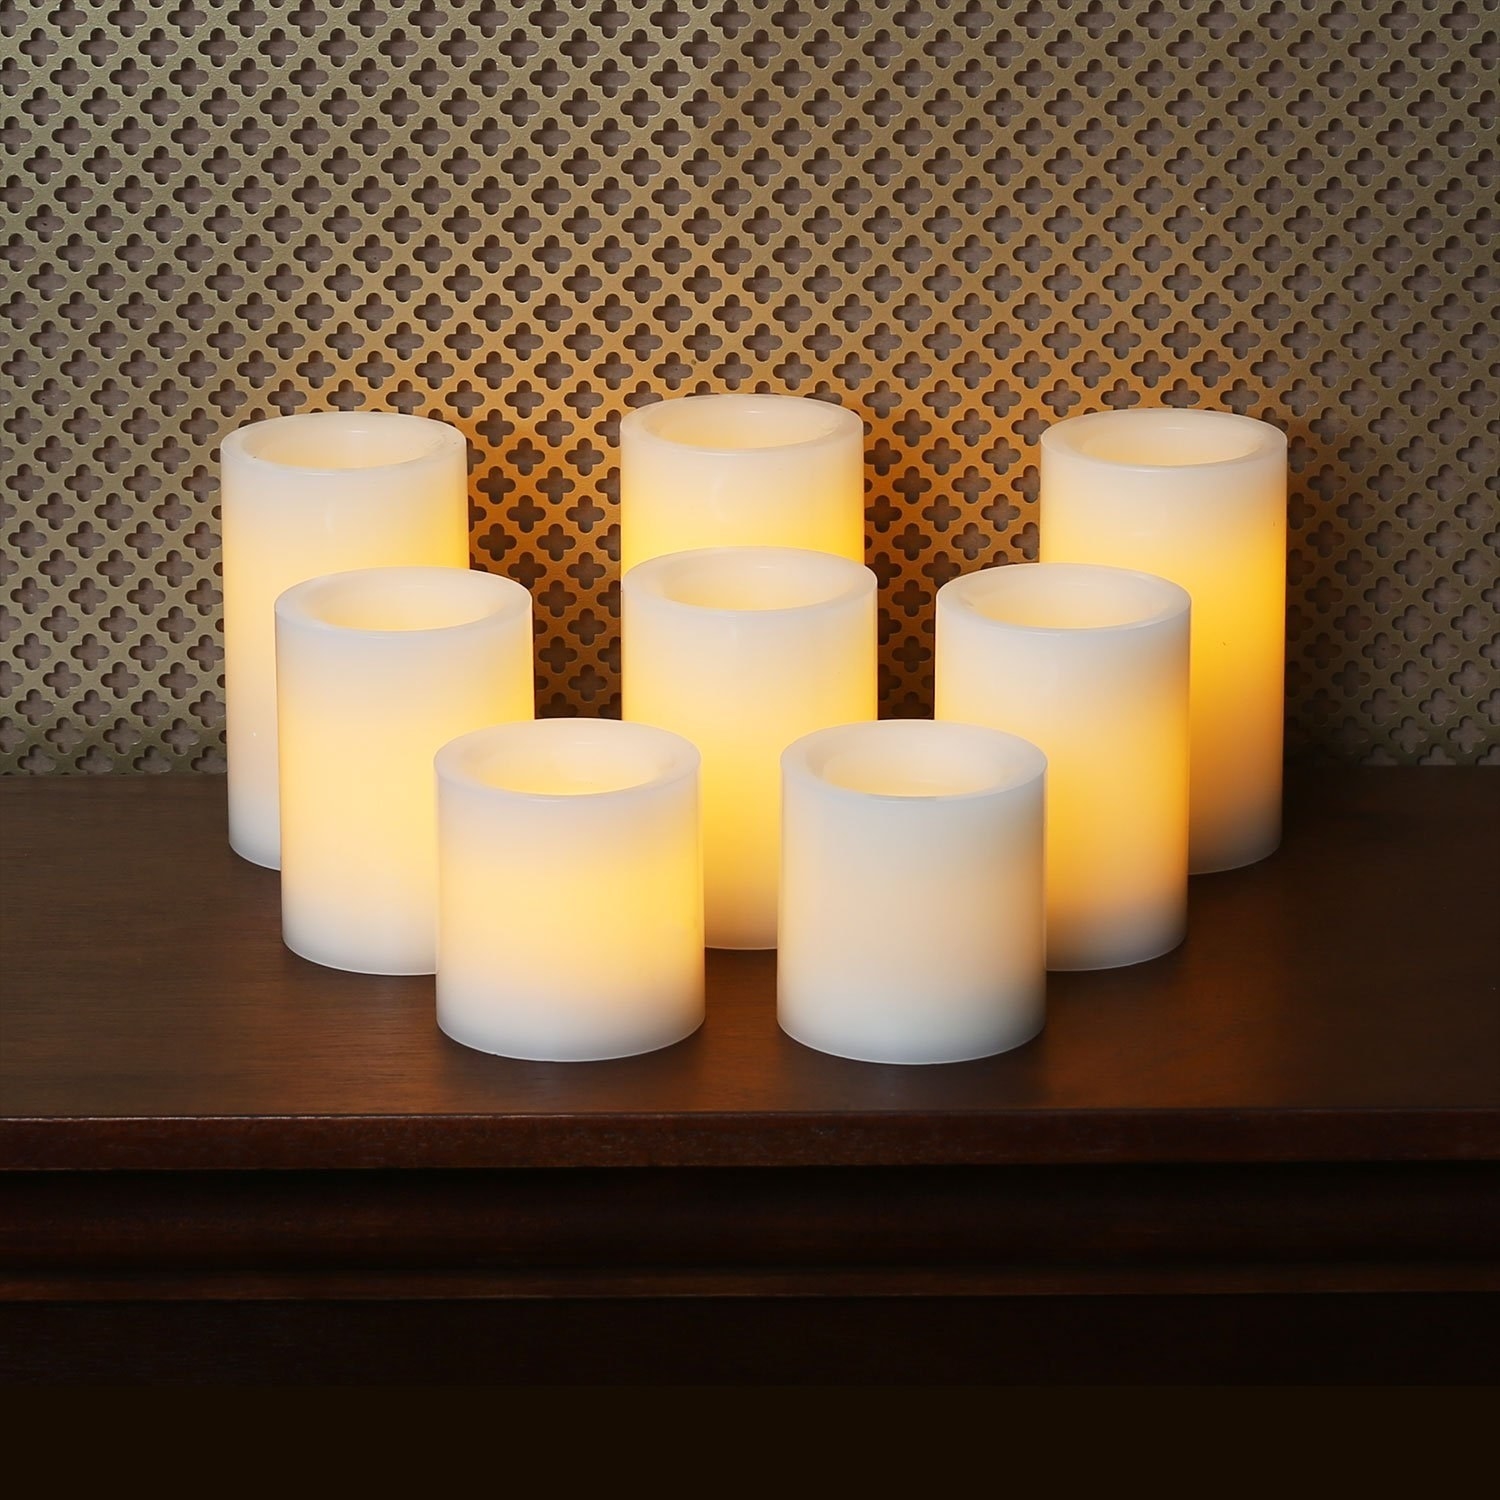 The set of eight candles in three different sizes